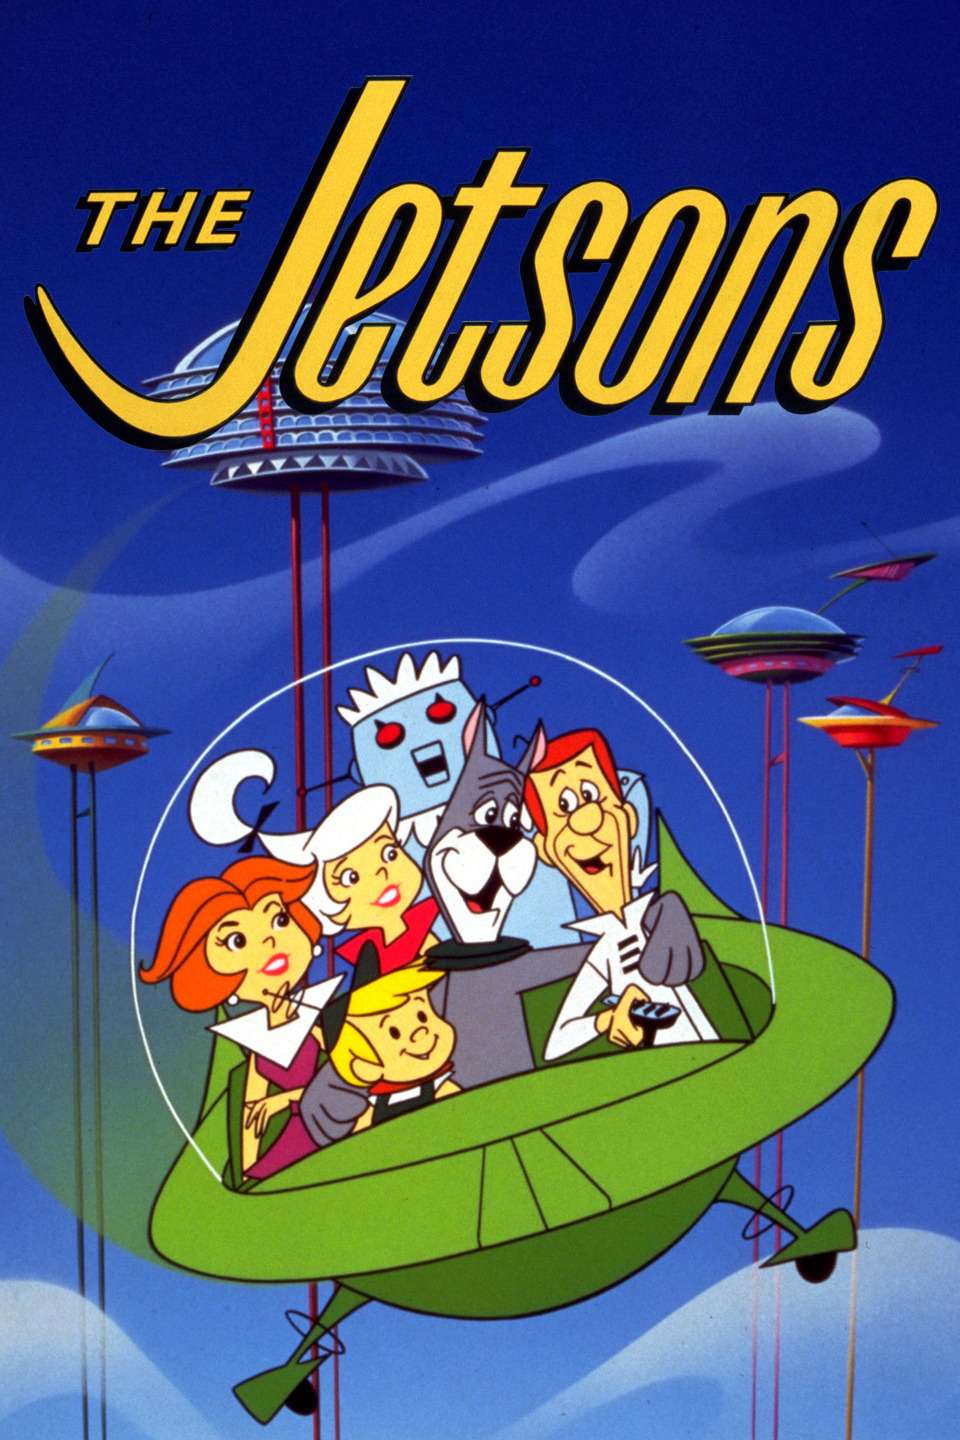 The Jetsons (TV Series 1962)